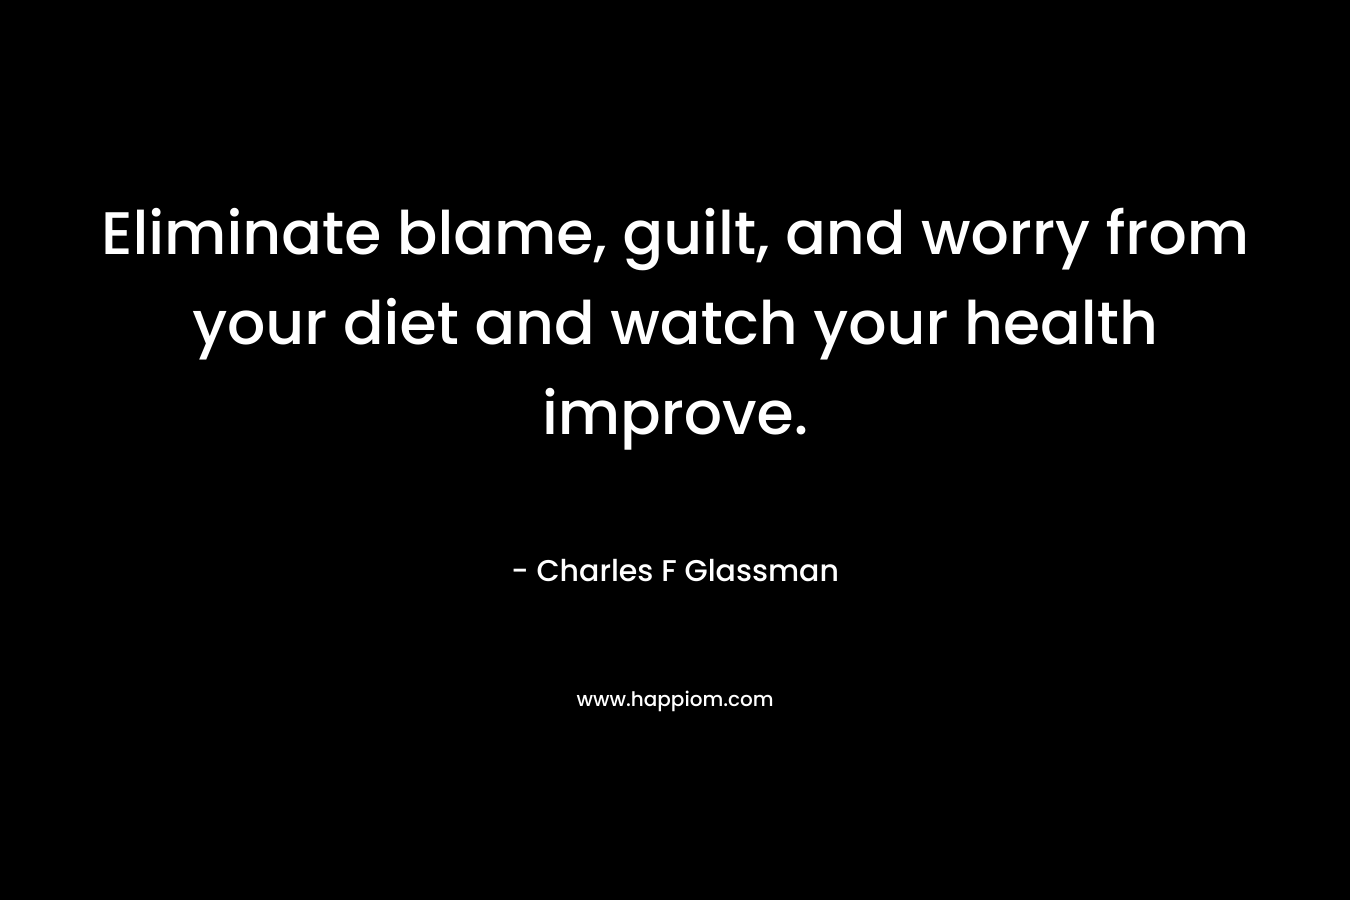 Eliminate blame, guilt, and worry from your diet and watch your health improve.